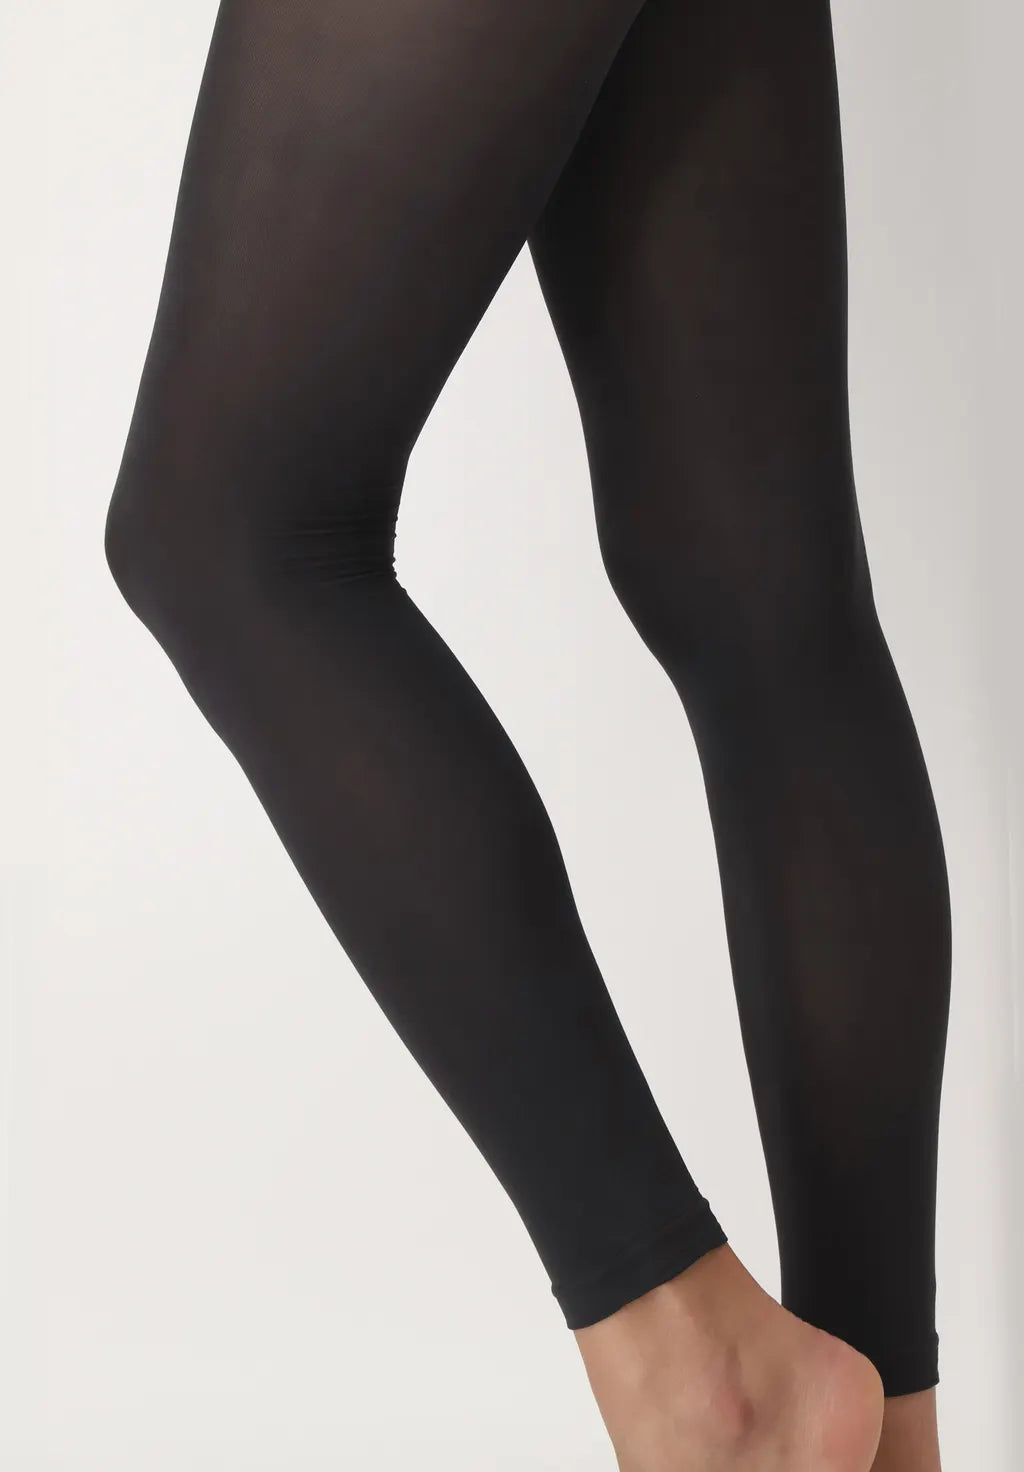 OroblÌ_ All Colors Leggings - Dark grey / anthracite soft matte opaque footless tights with deep comfort waist band, flat seams and gusset.